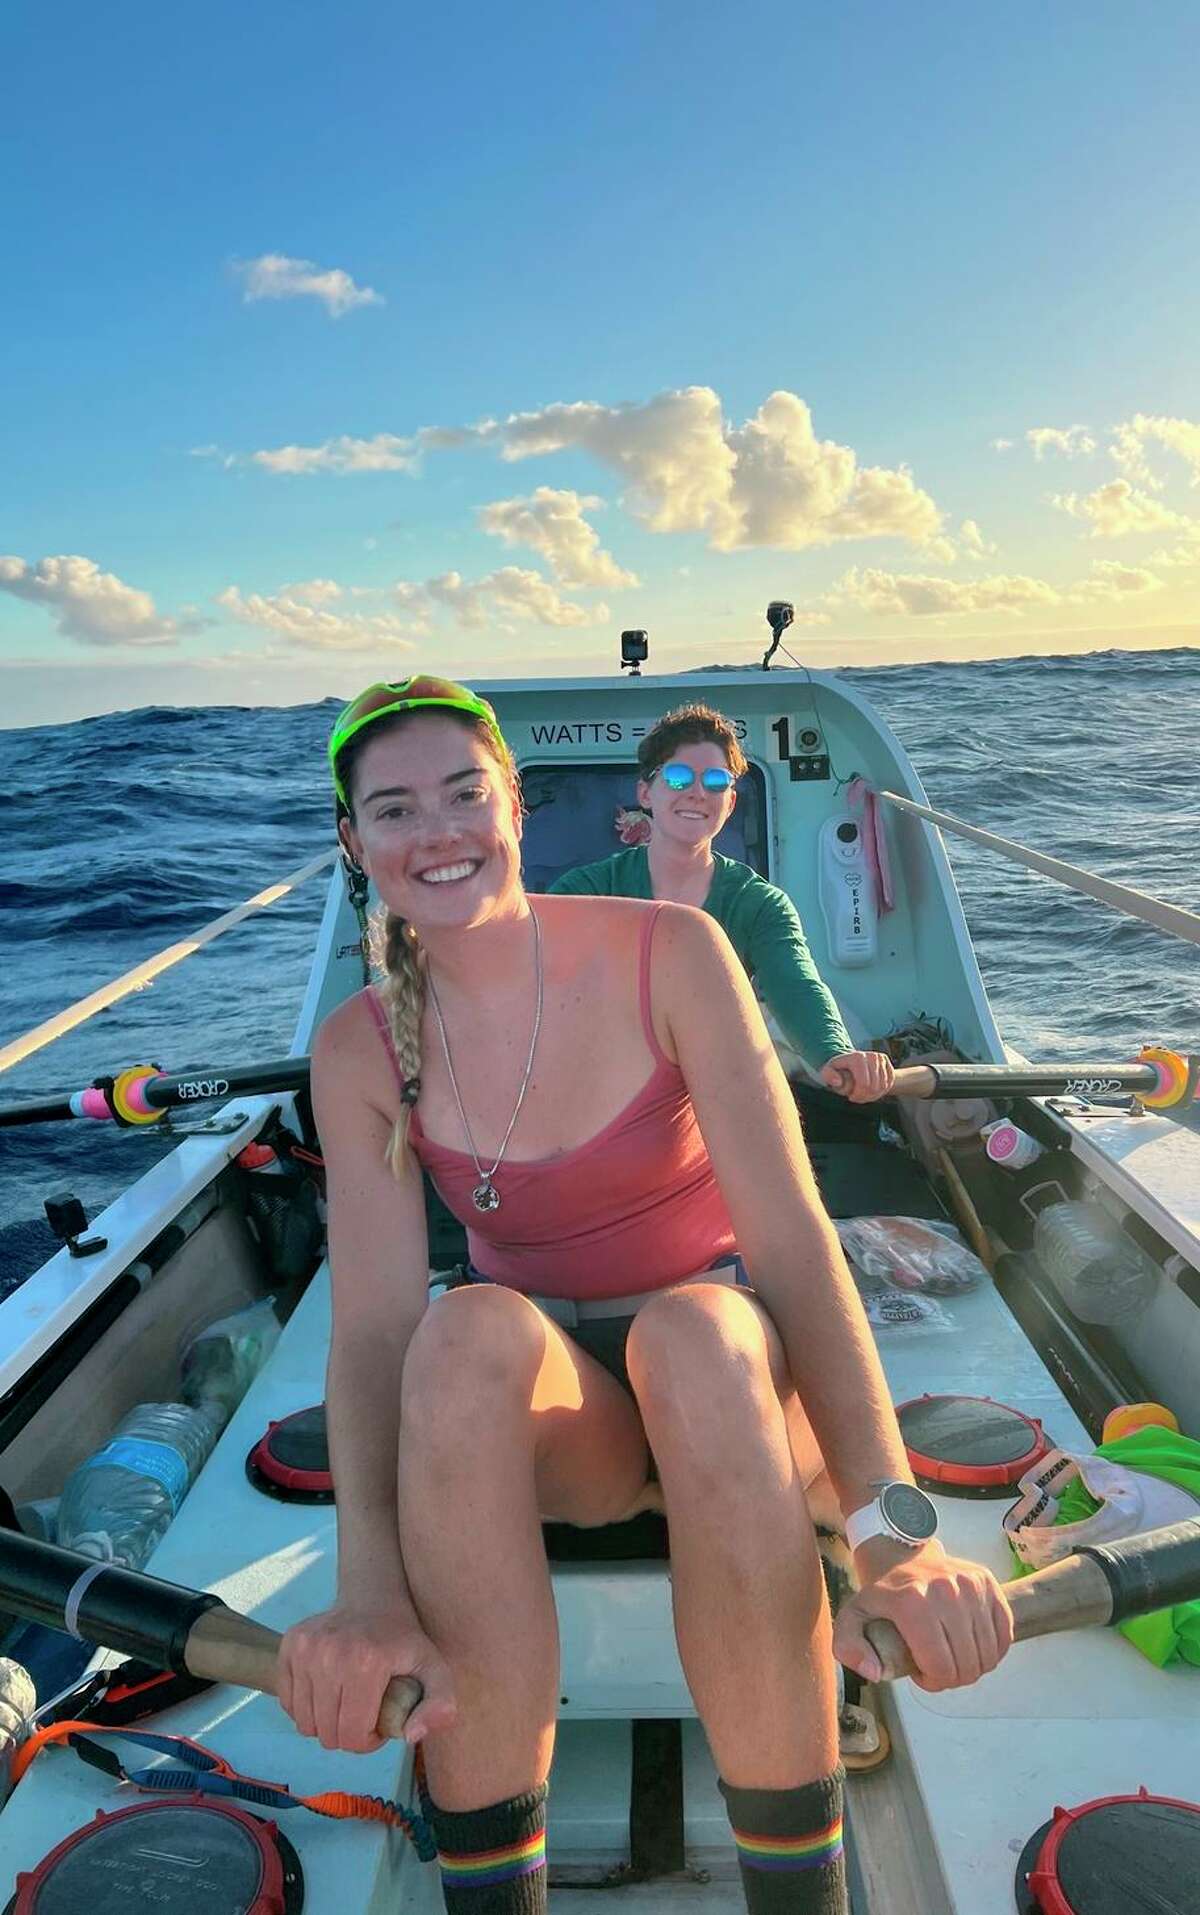 Rowers Brooke Downes (front) and Libby Costello take their turn at the oars during their Pacific voyage from San Francisco to Hawaii.